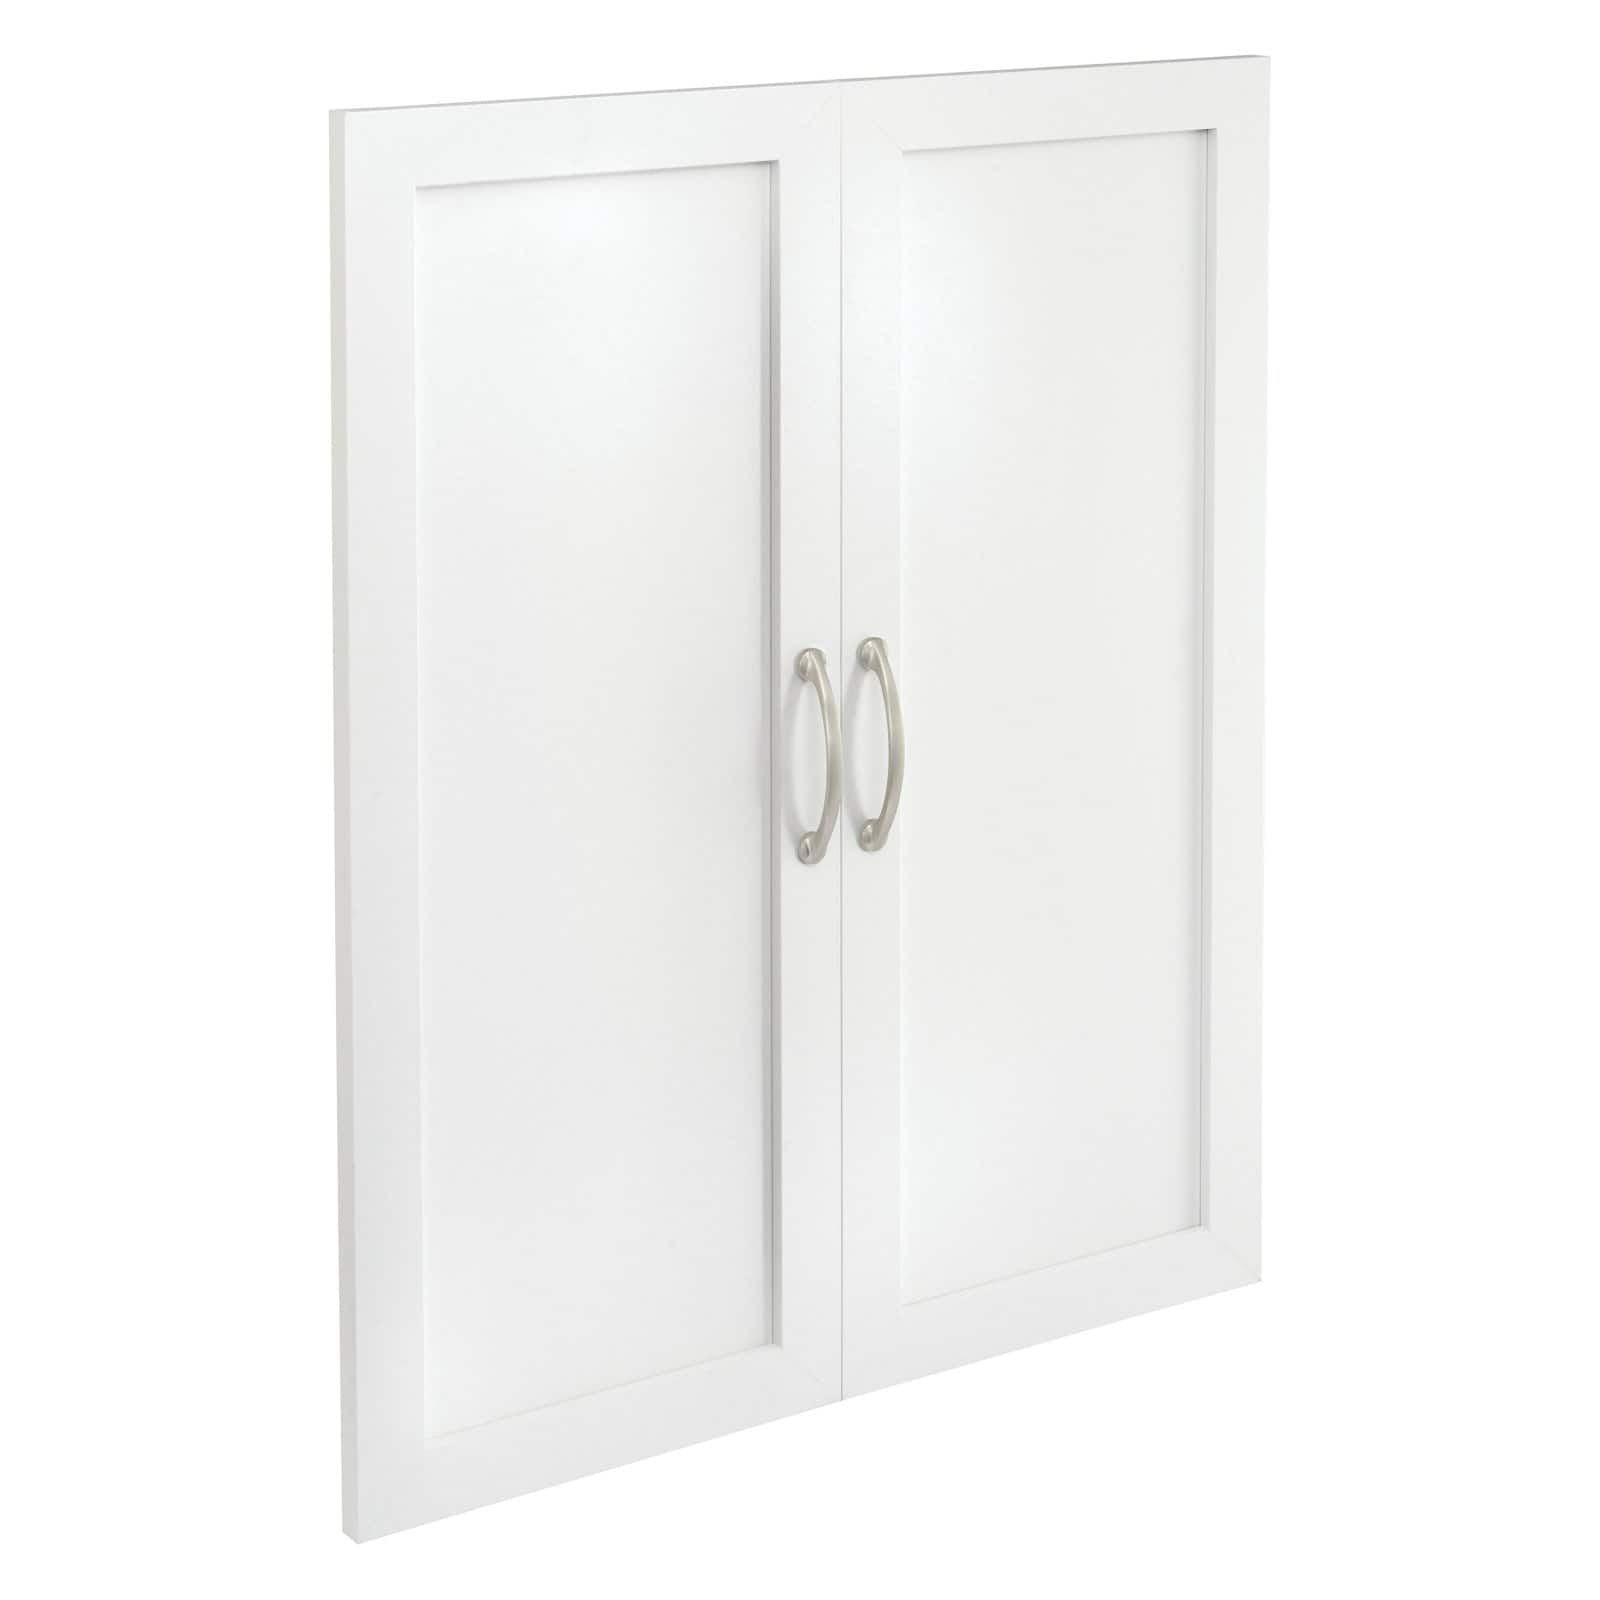 Excellence quality Saver Prices ClosetMaid 4875 SuiteSymphony 25-Inch ...